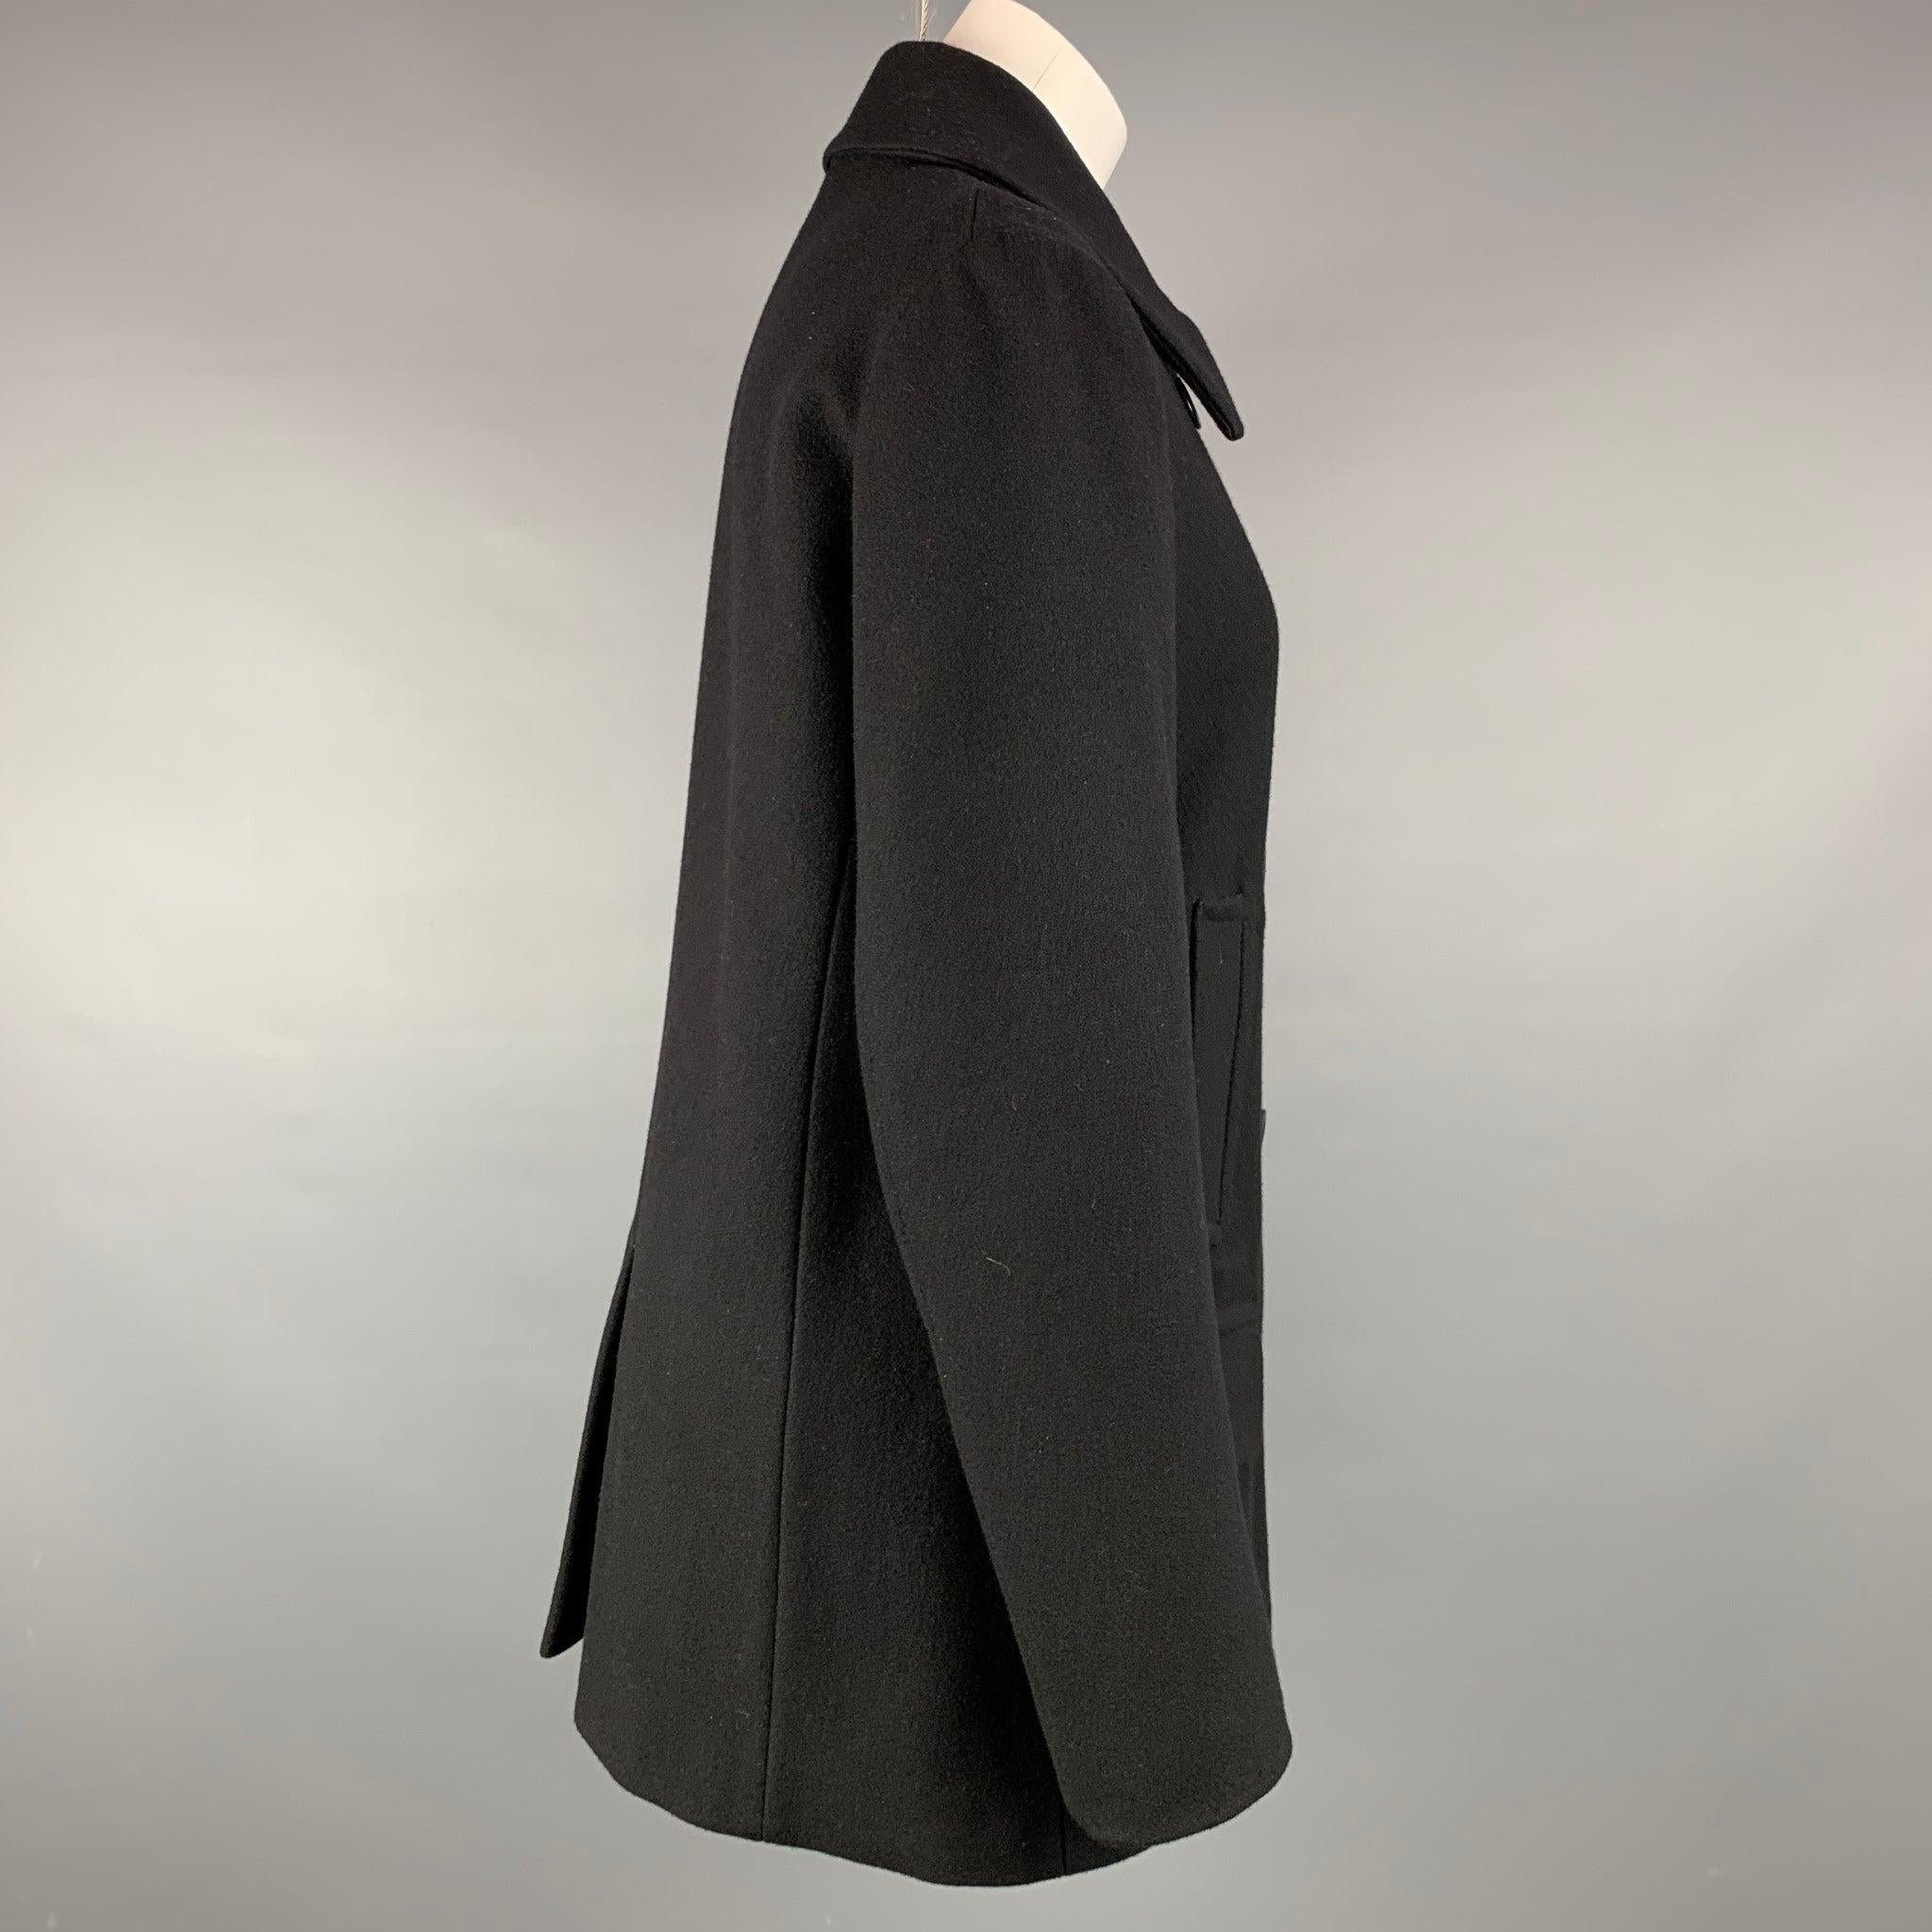 DRIES VAN NOTEN coat comes in a black wool blend with a full liner featuring a pointed collar, flap pockets, and a double breasted closure.
Very Good
Pre-Owned Condition. 

Marked:  L 

Measurements: 
 
Shoulder: 16 inches Bust: 40 inches Sleeve: